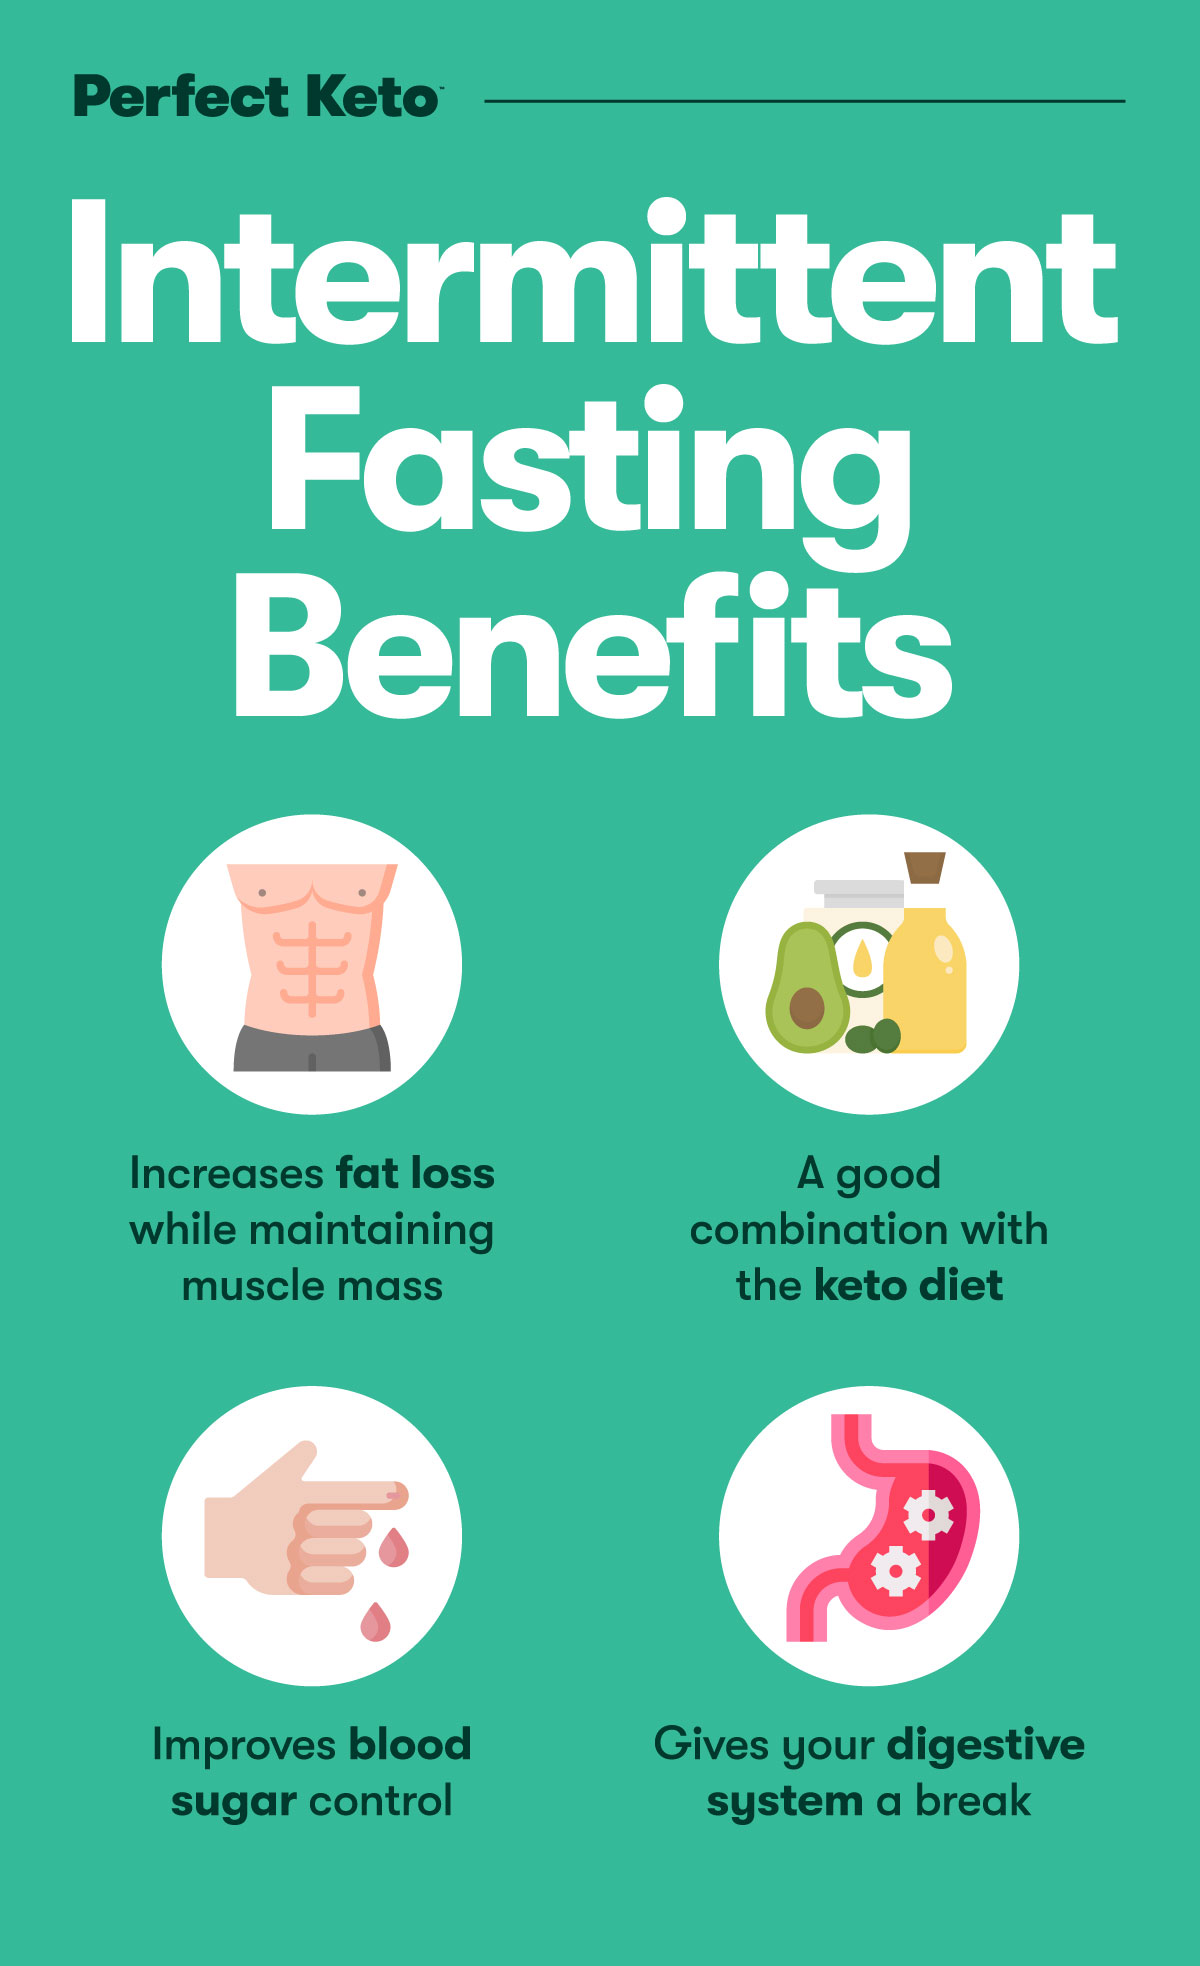 8 Tips for Successfully Incorporating Intermittent Fasting Into Your Lifestyle